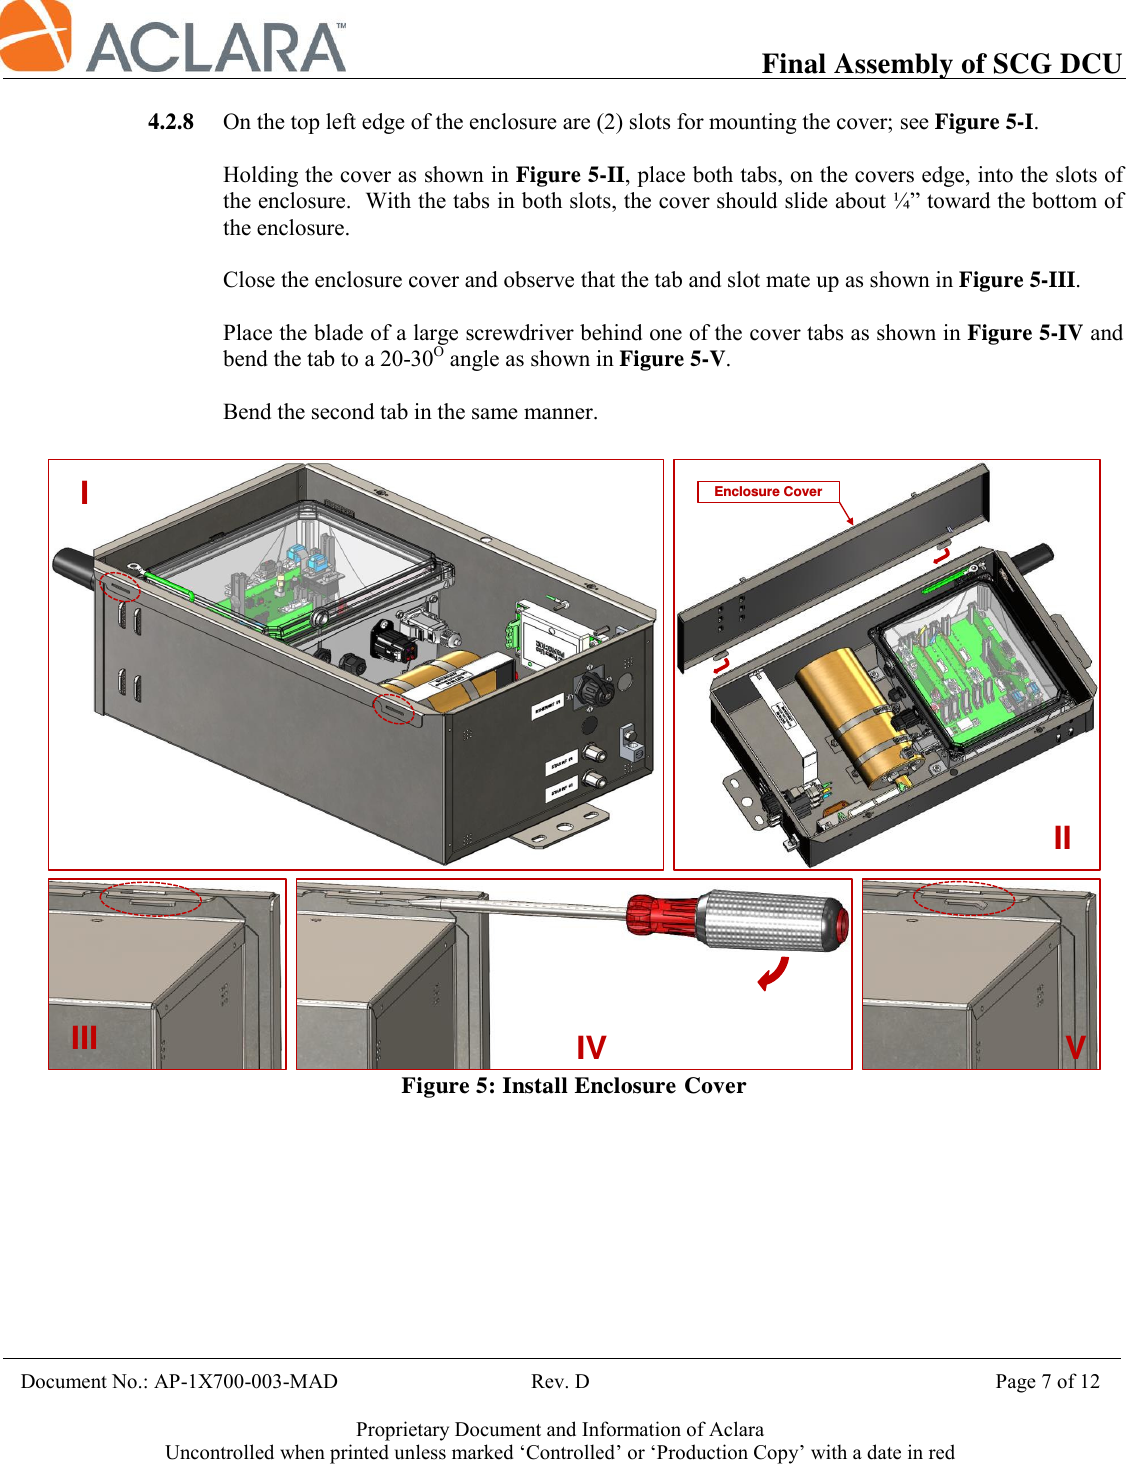           Final Assembly of SCG DCU    Document No.: AP-1X700-003-MAD                                     Rev. D                                             Page 7 of 12  Proprietary Document and Information of Aclara Uncontrolled when printed unless marked ‘Controlled’ or ‘Production Copy’ with a date in red  4.2.8 On the top left edge of the enclosure are (2) slots for mounting the cover; see Figure 5-I.  Holding the cover as shown in Figure 5-II, place both tabs, on the covers edge, into the slots of the enclosure.  With the tabs in both slots, the cover should slide about ¼” toward the bottom of the enclosure.    Close the enclosure cover and observe that the tab and slot mate up as shown in Figure 5-III.  Place the blade of a large screwdriver behind one of the cover tabs as shown in Figure 5-IV and bend the tab to a 20-30O angle as shown in Figure 5-V.  Bend the second tab in the same manner.    Figure 5: Install Enclosure CoverEnclosure CoverIIIIIIIVV